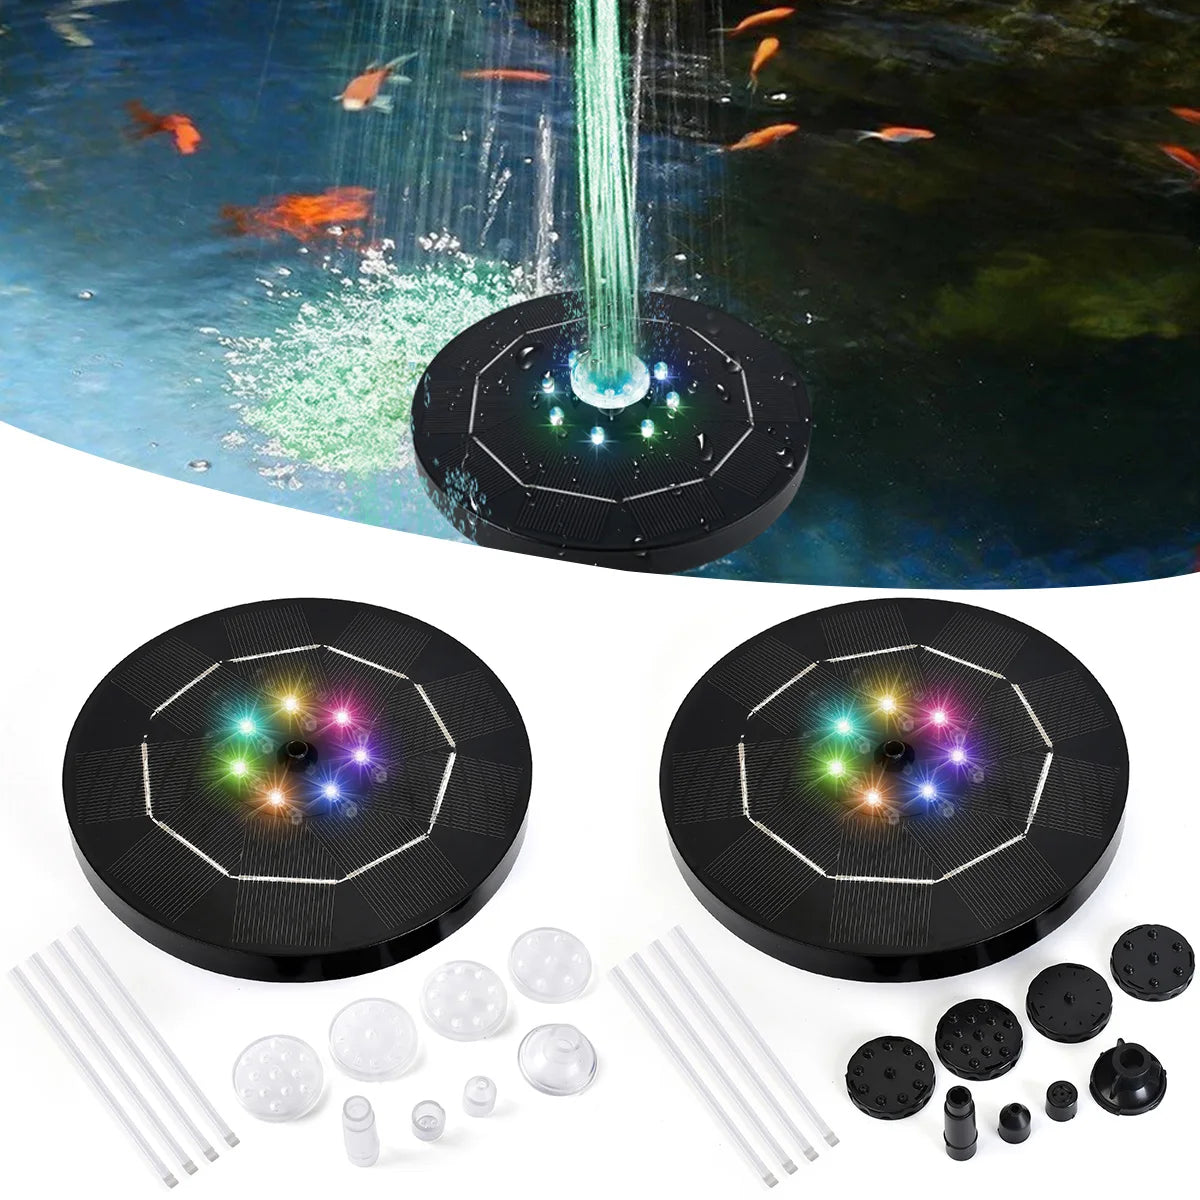 16cm Round Solar Fountain, Solar-powered charger powers equipment in 4 hours, ideal for nighttime or cloudy day use.